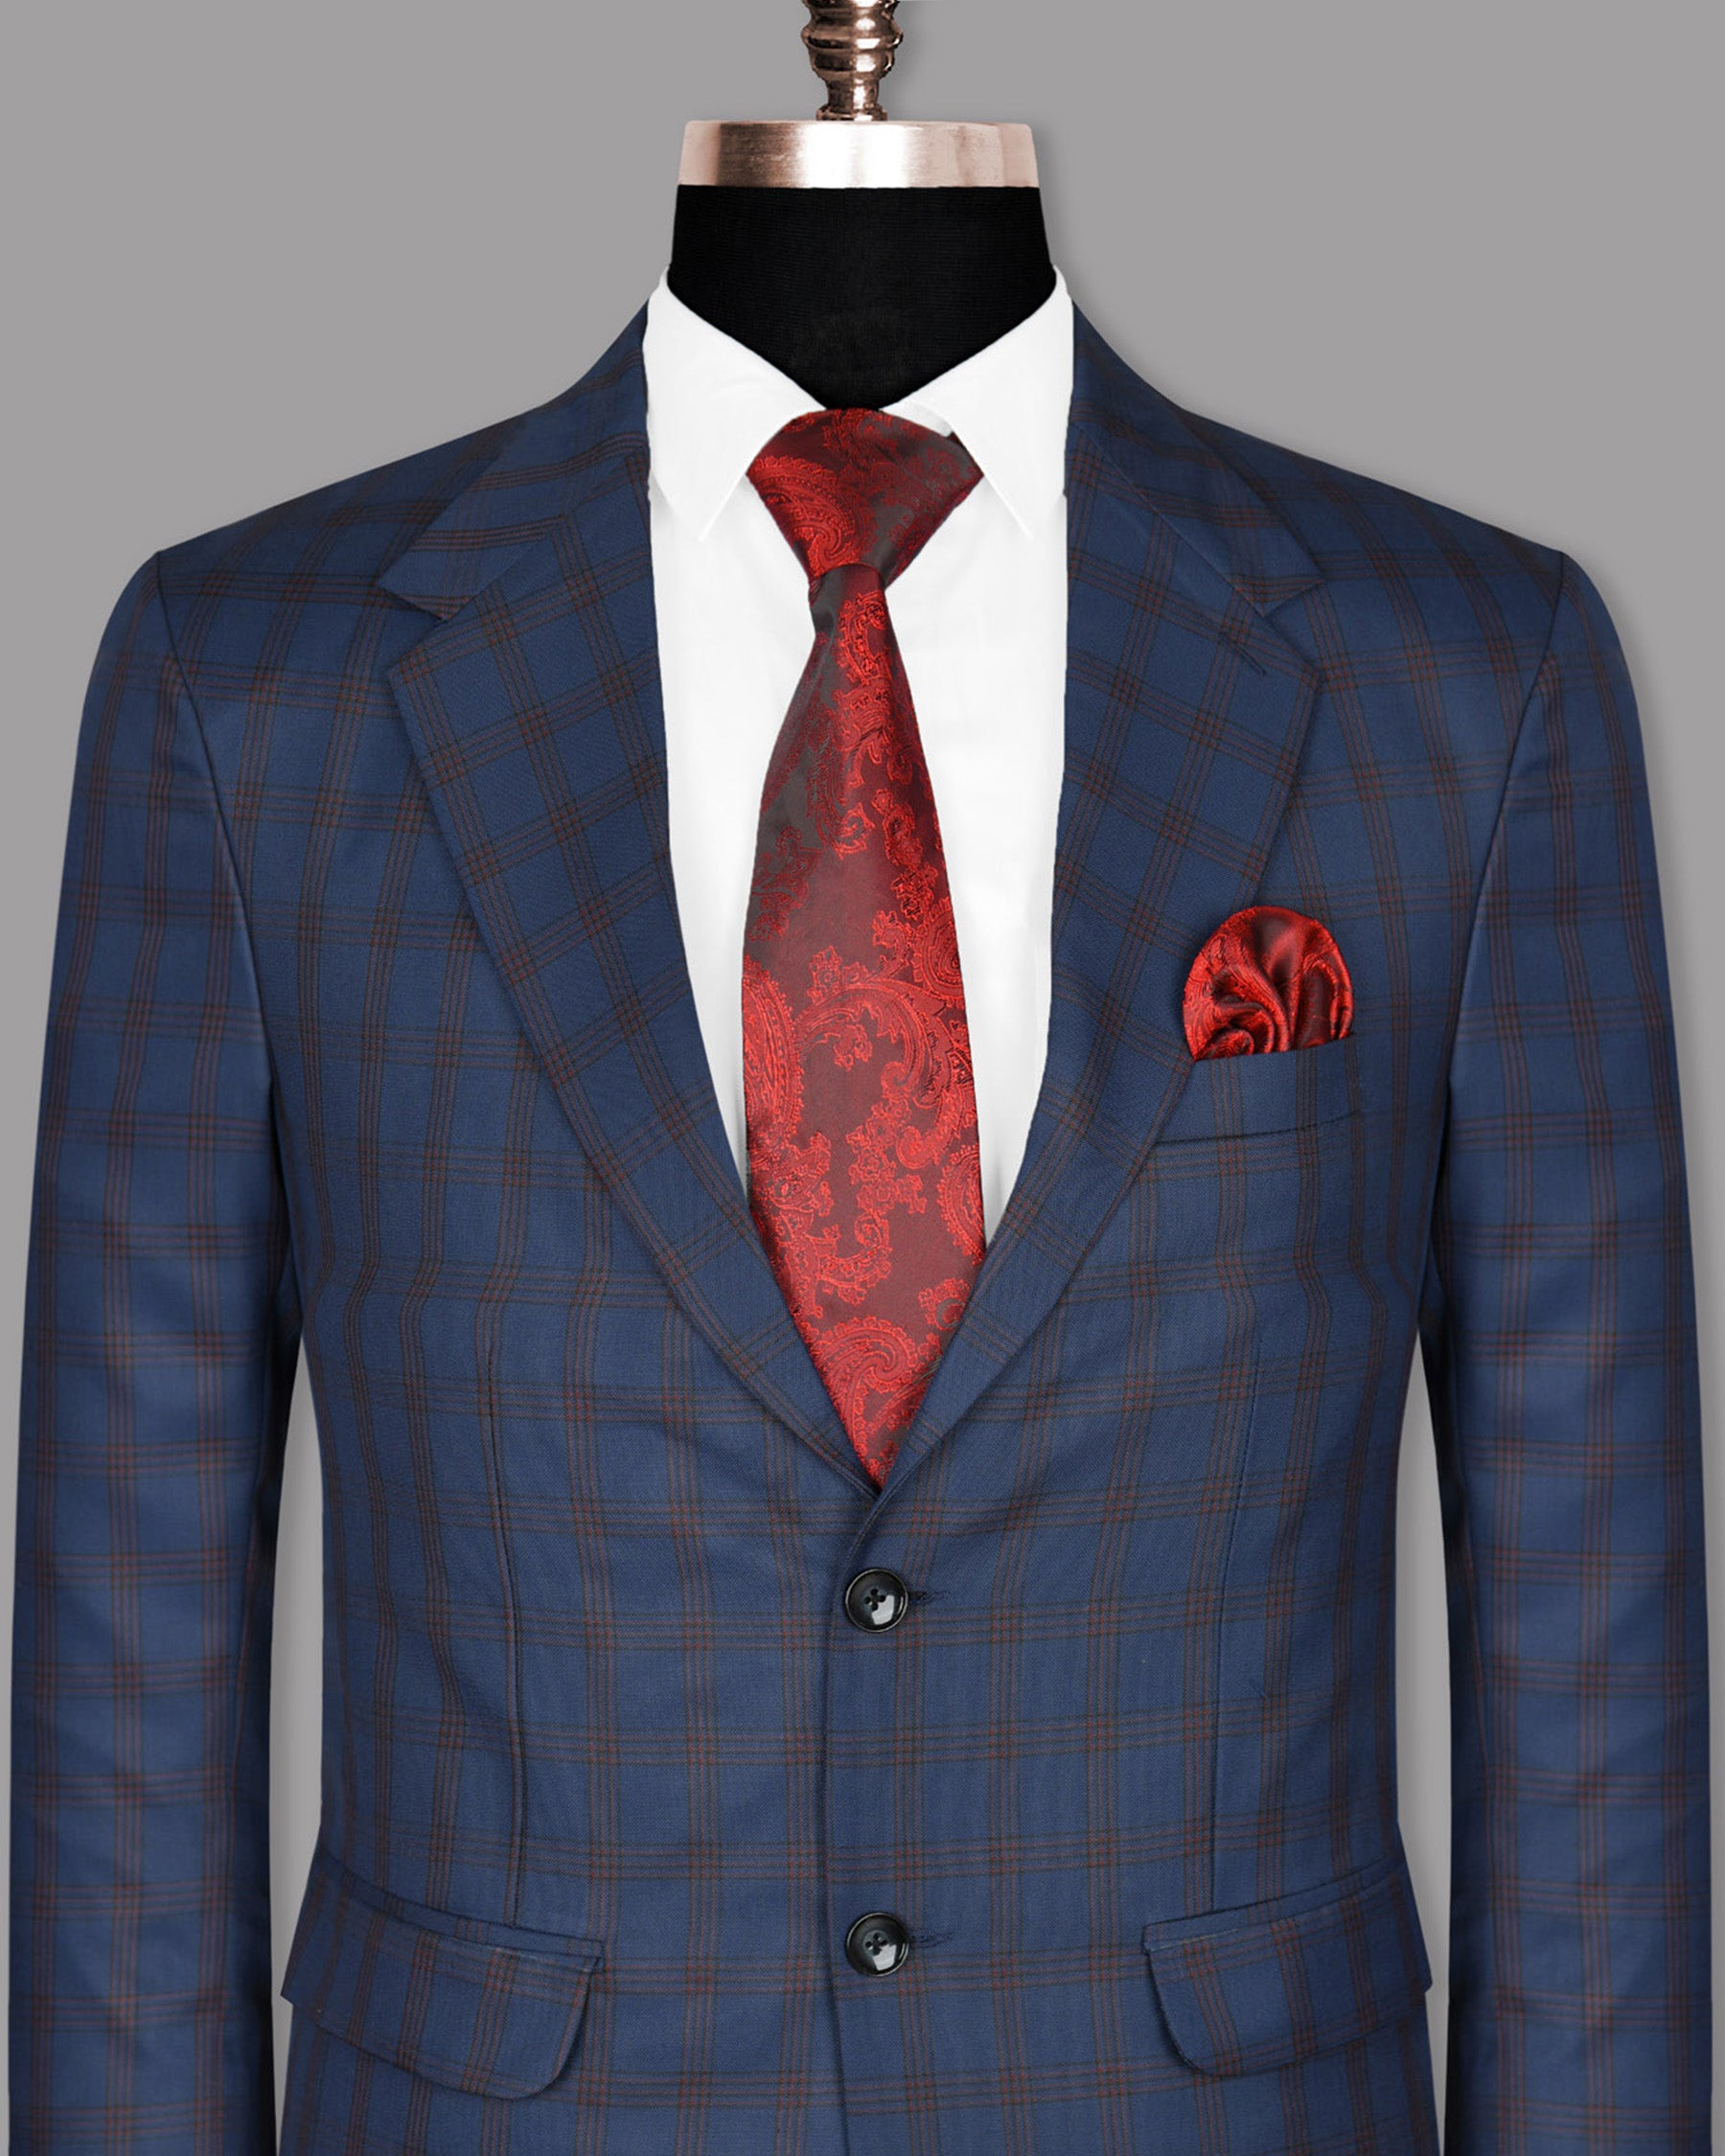 Space Blue with Russet Windowpane Premium Wool Rich Blazer BL926-SB-44, BL926-SB-46, BL926-SB-48, BL926-SB-50, BL926-SB-60, BL926-SB-52, BL926-SB-54, BL926-SB-38, BL926-SB-40, BL926-SB-36, BL926-SB-42, BL926-SB-56, BL926-SB-58